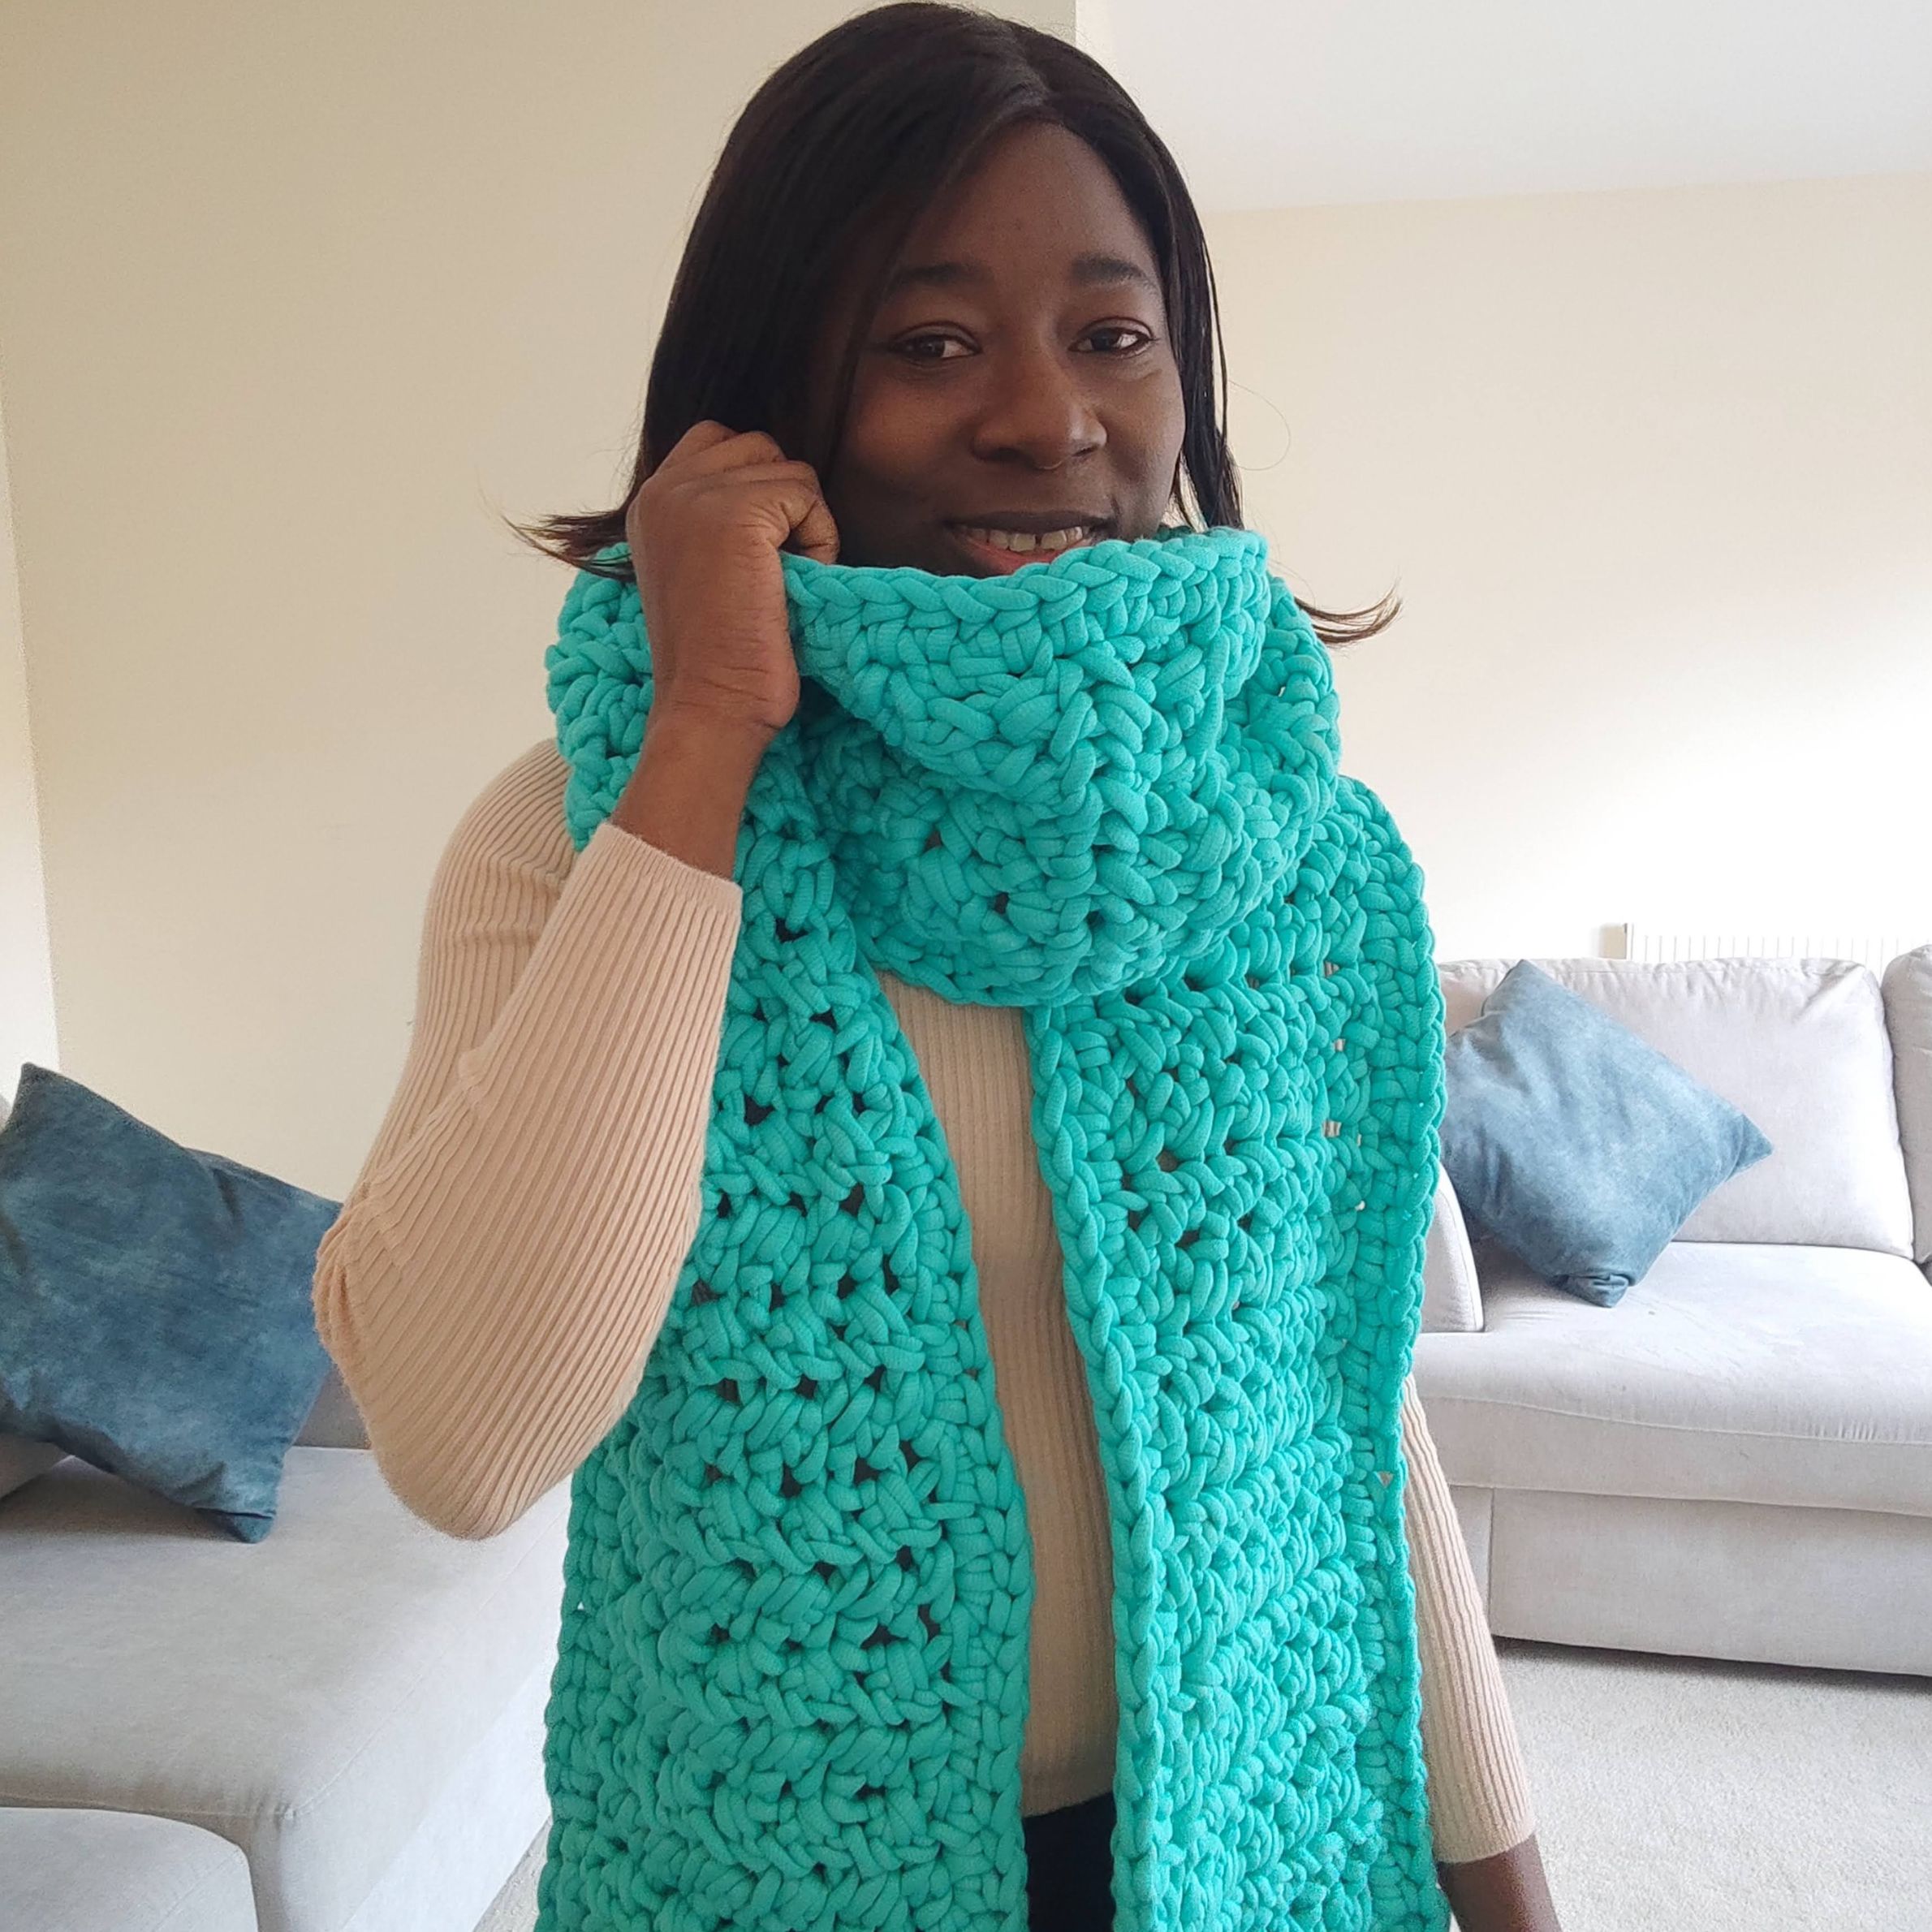 How to Crochet a Scarf That Looks Knitted